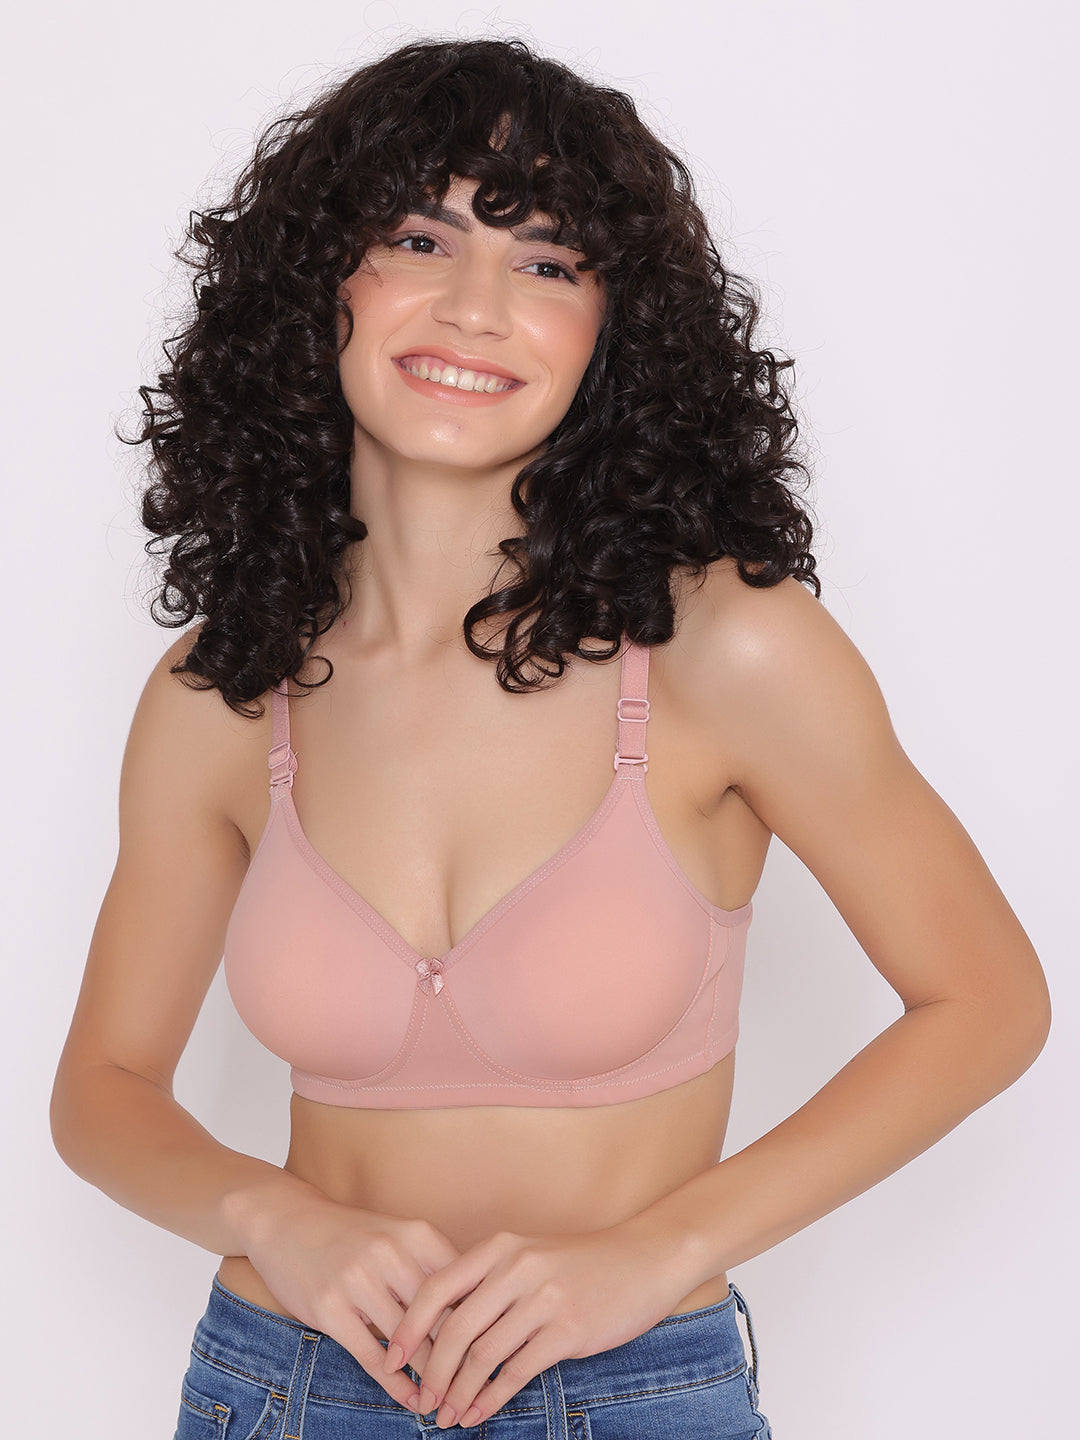 Non-Wired T-Shirt Bras 3 Pack, Lingerie